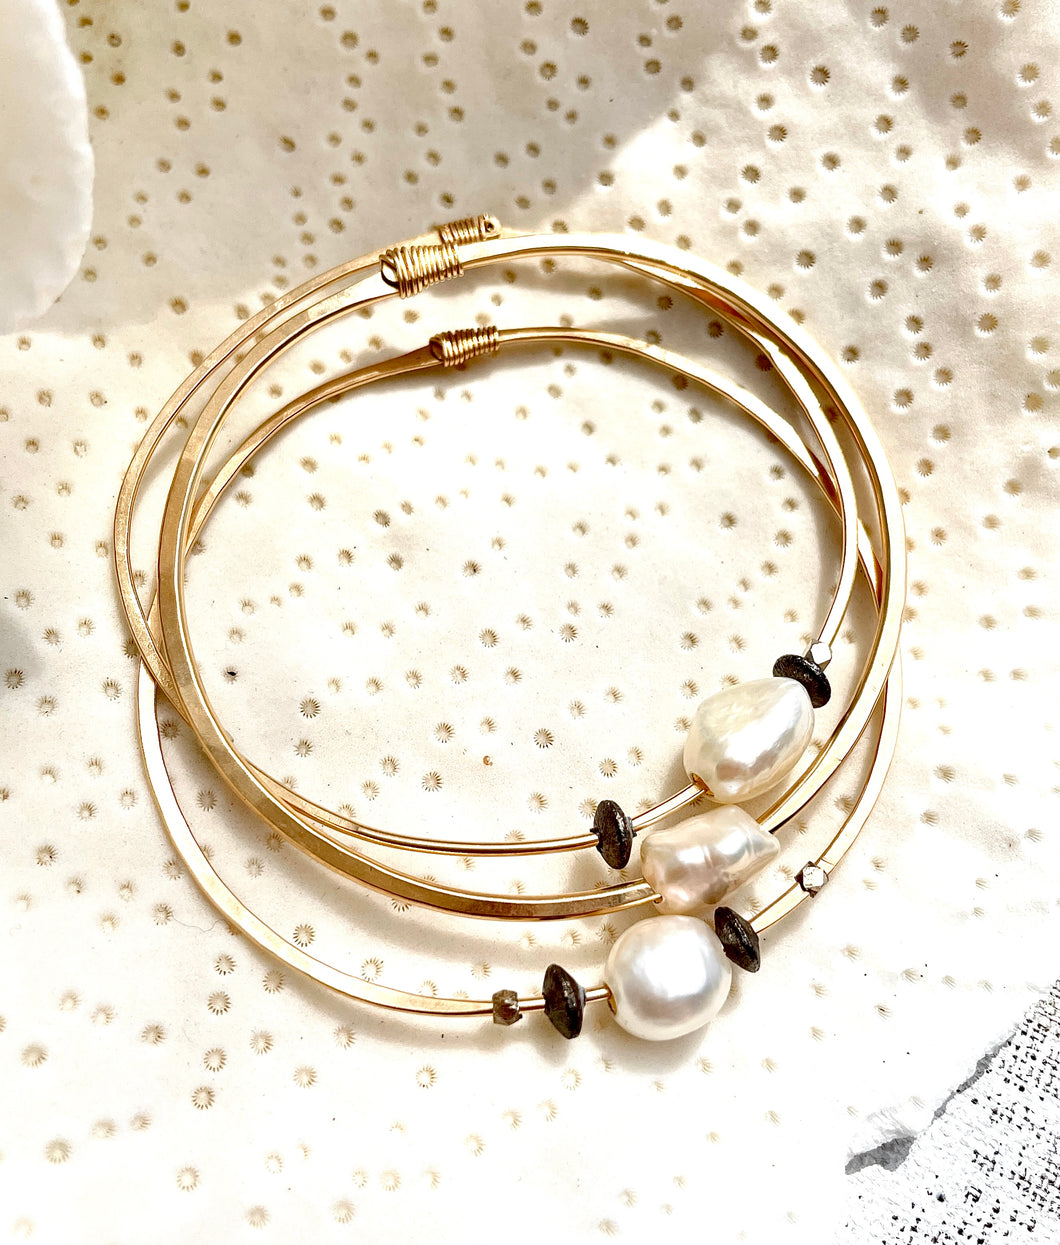 14K yellow gold-filled hammered bangle with freshwater pearl and oxidized accent beads